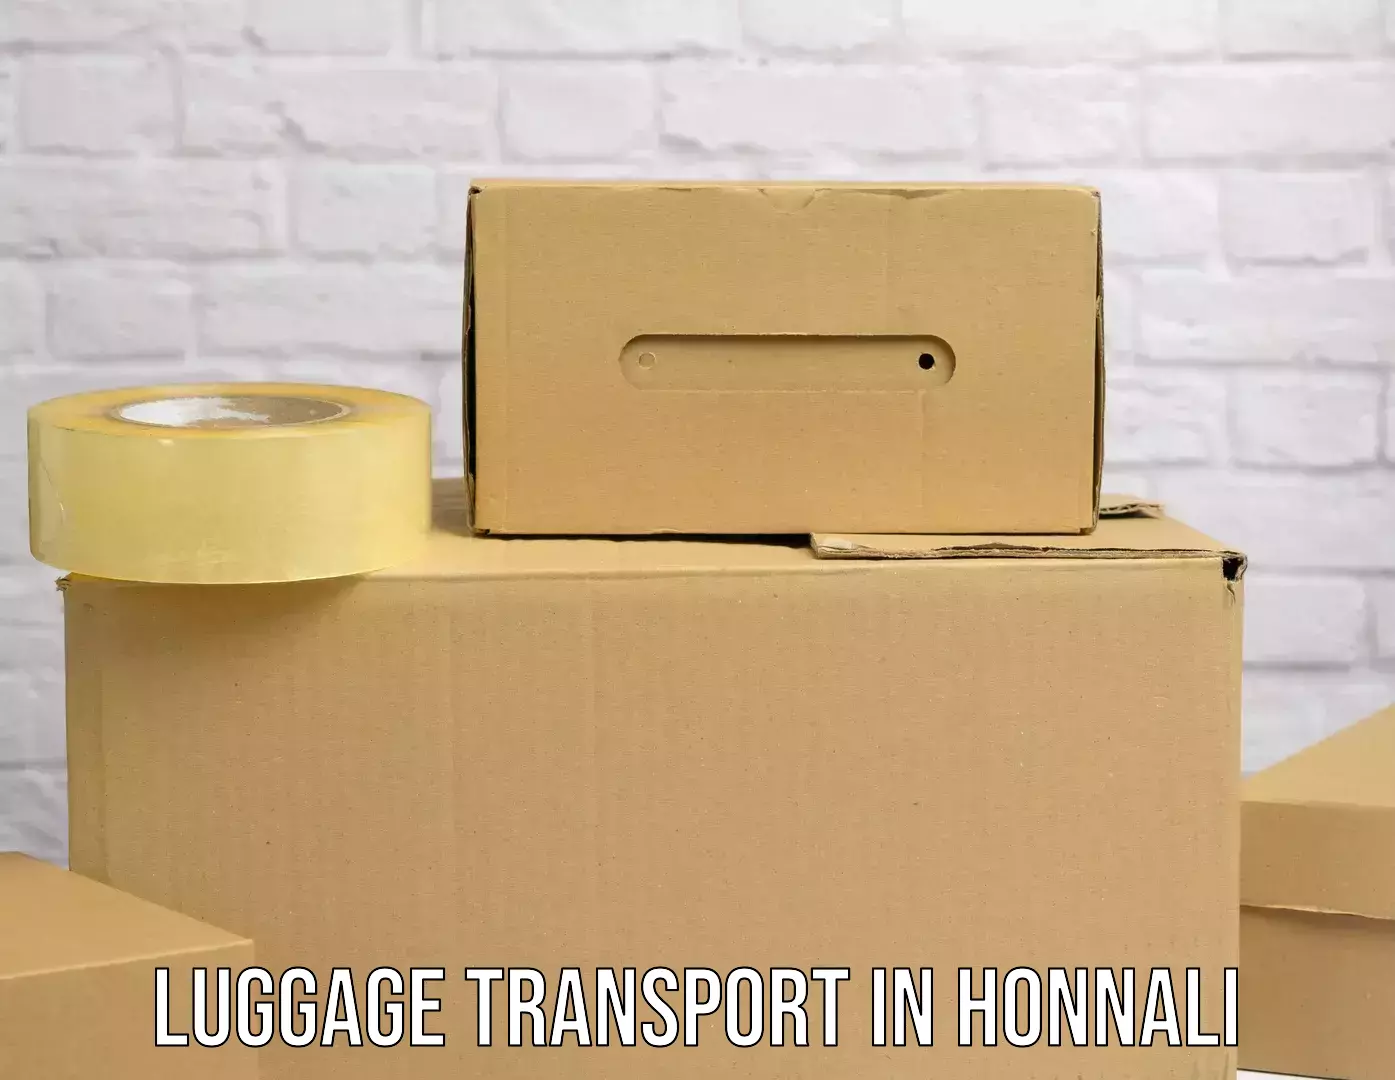 Luggage transport rates in Honnali